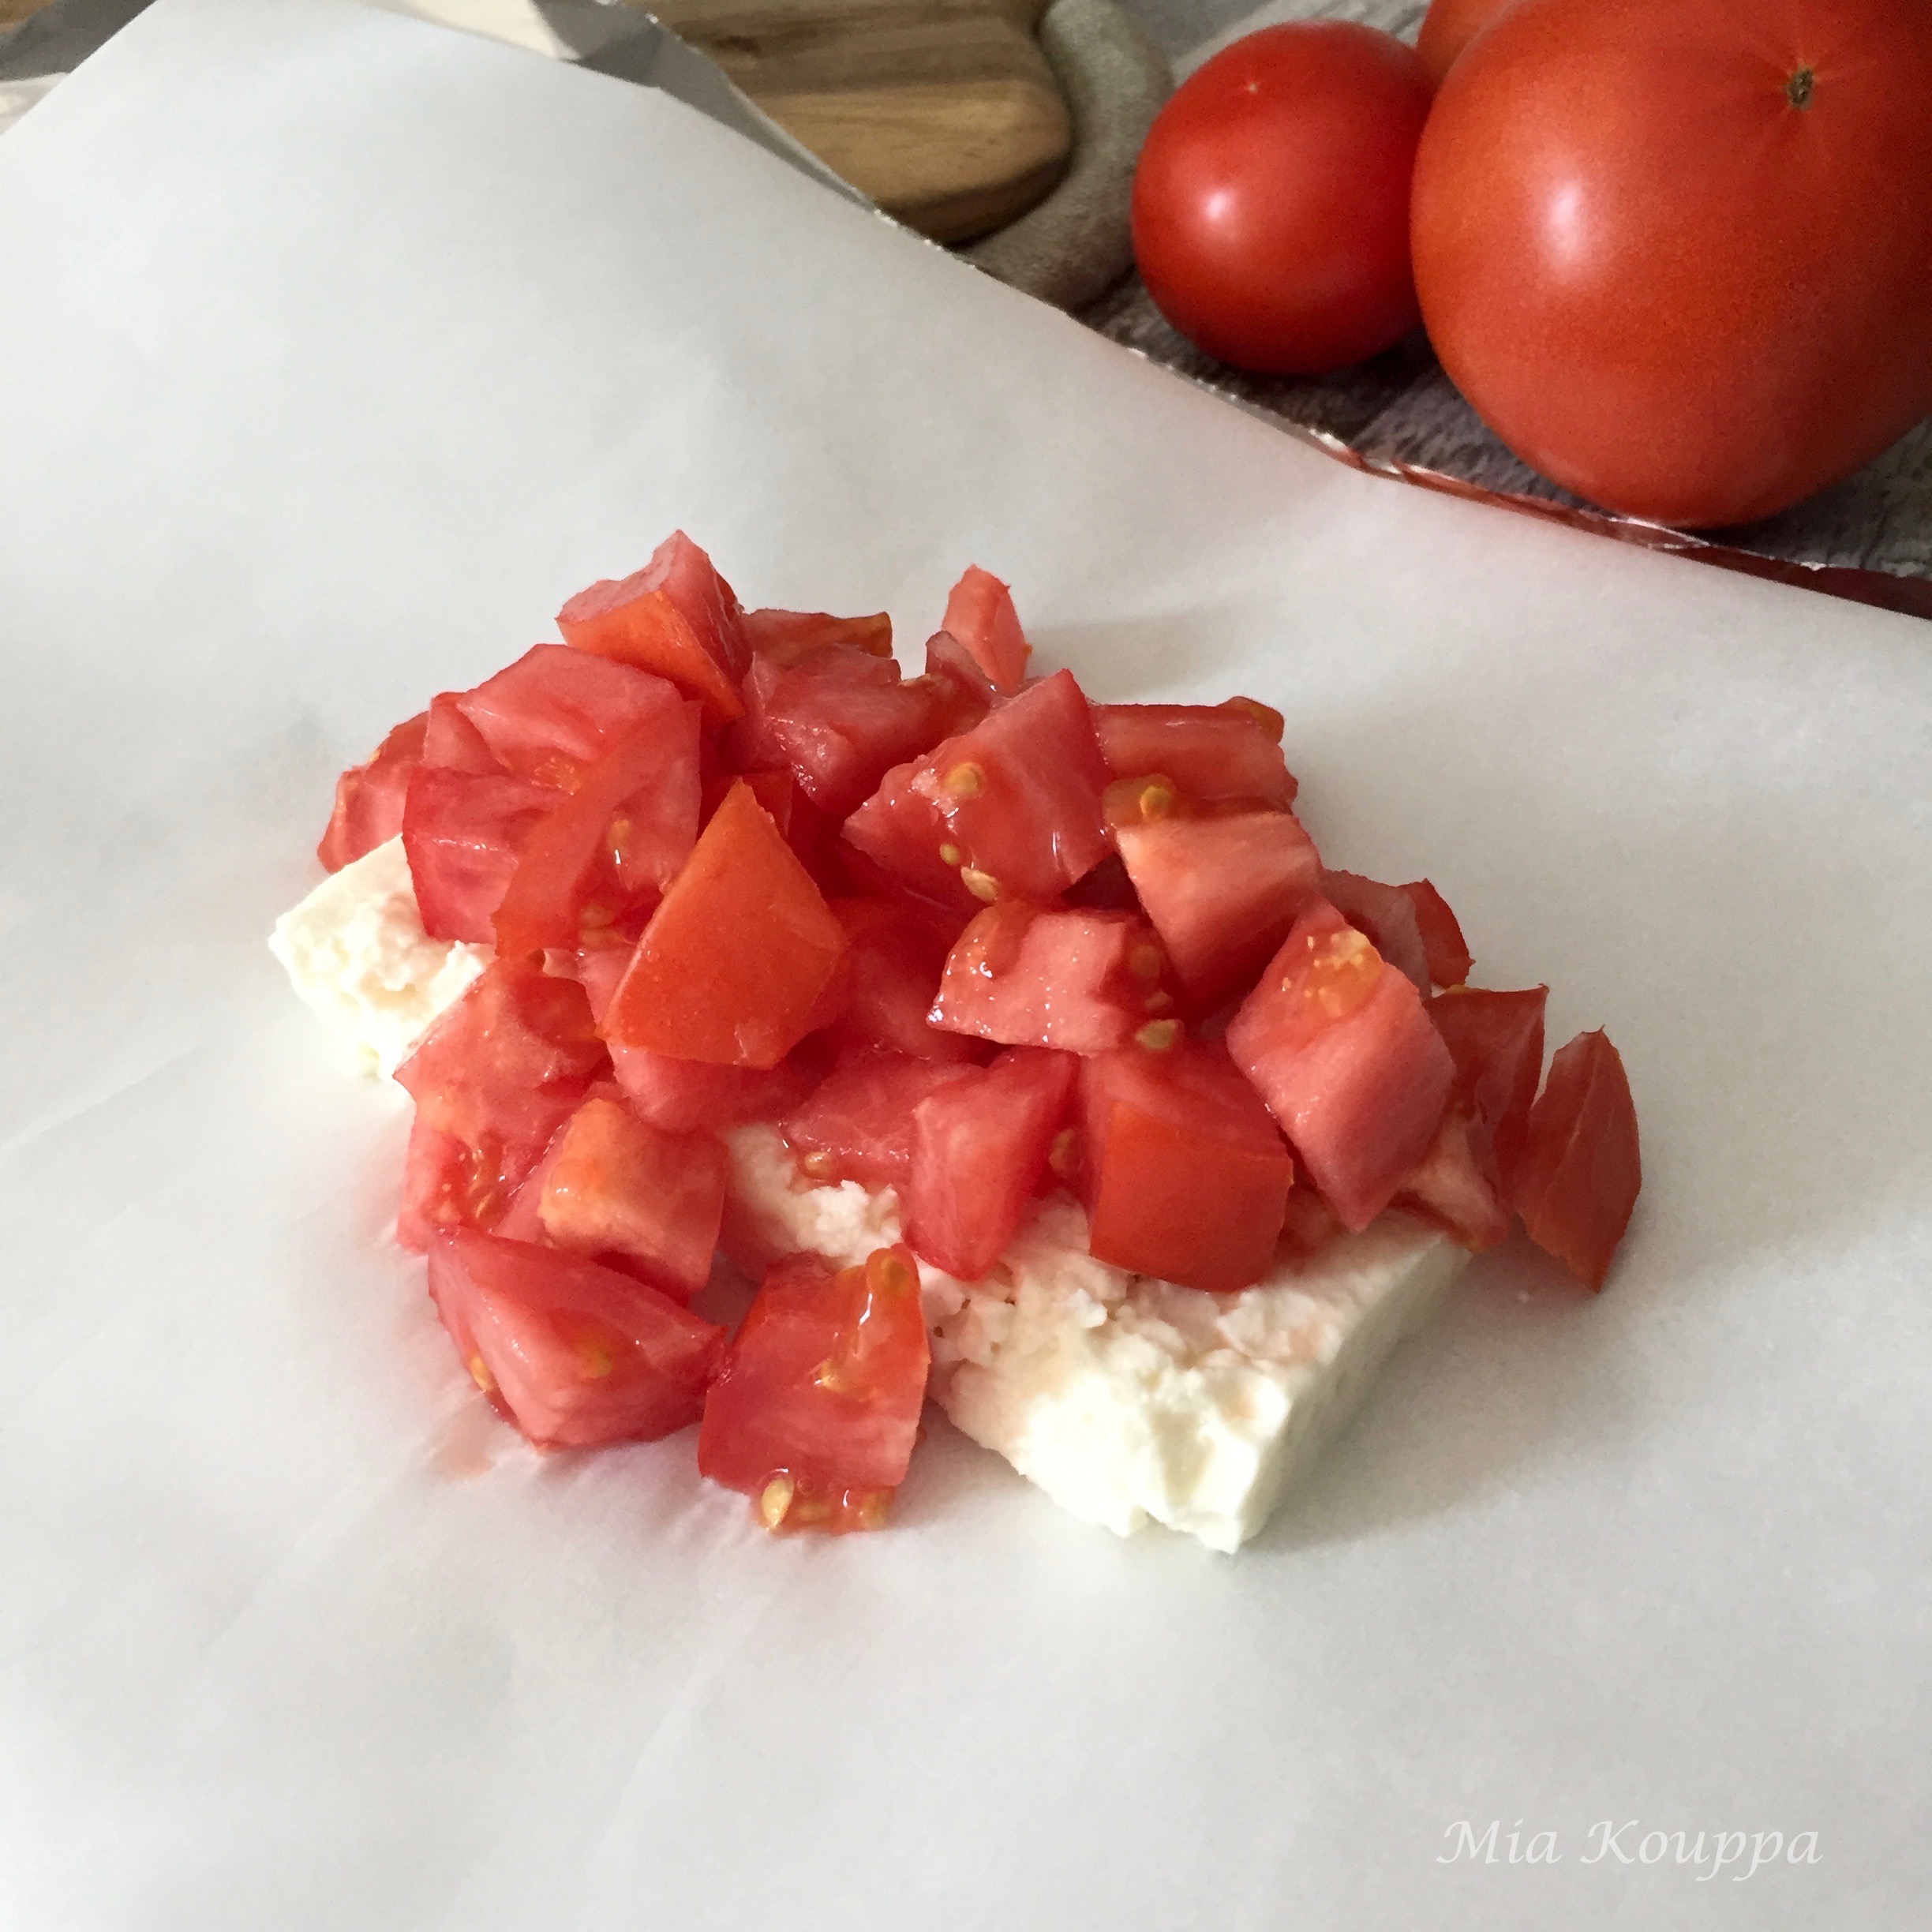 Warm feta packages, with tomatoes and olives